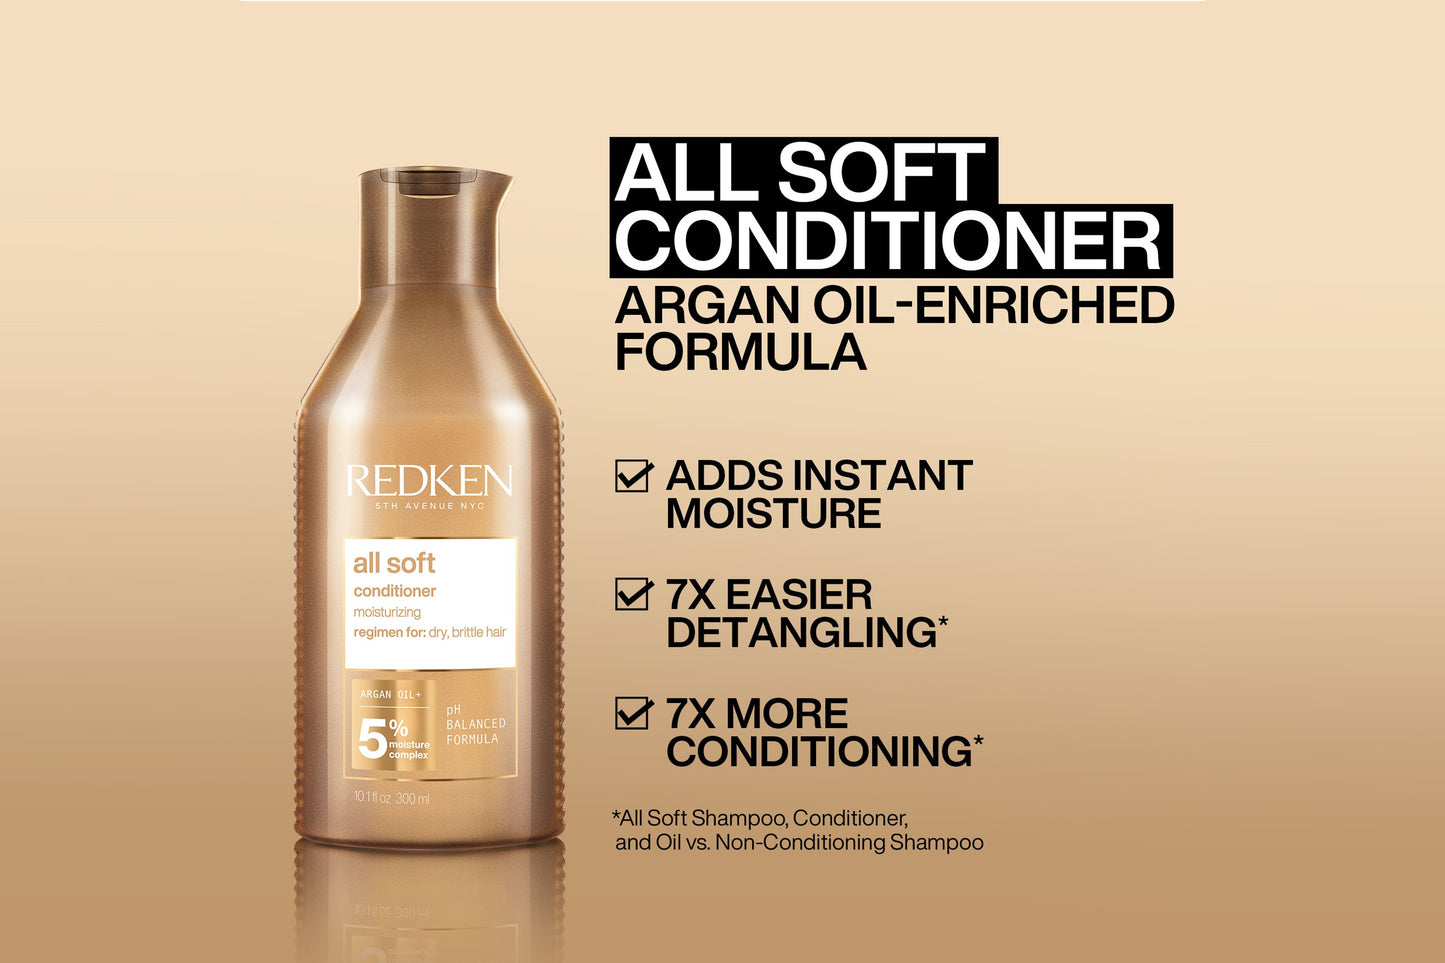 Redken All Soft Conditioner with Argan Oil 300ml